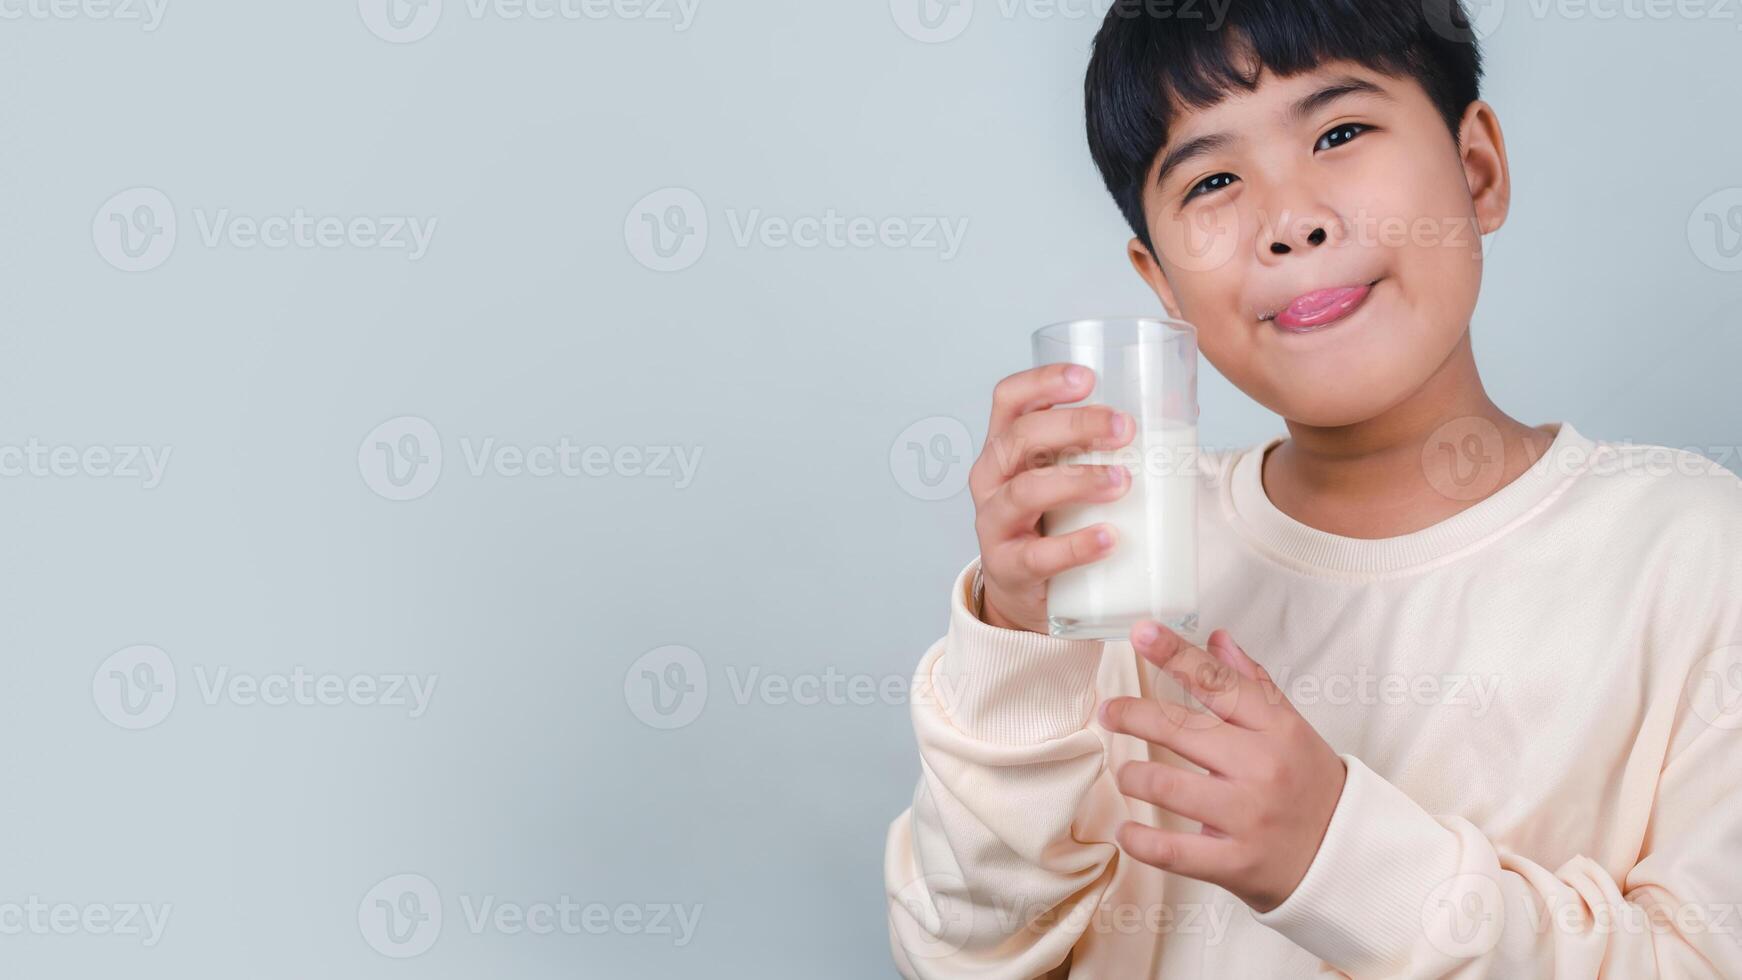 Concept of happy good nutrition, Portrait of a little young handsome kid boy in cream color shirt, Hold drinking milk box mockup, Isolated on white background. photo